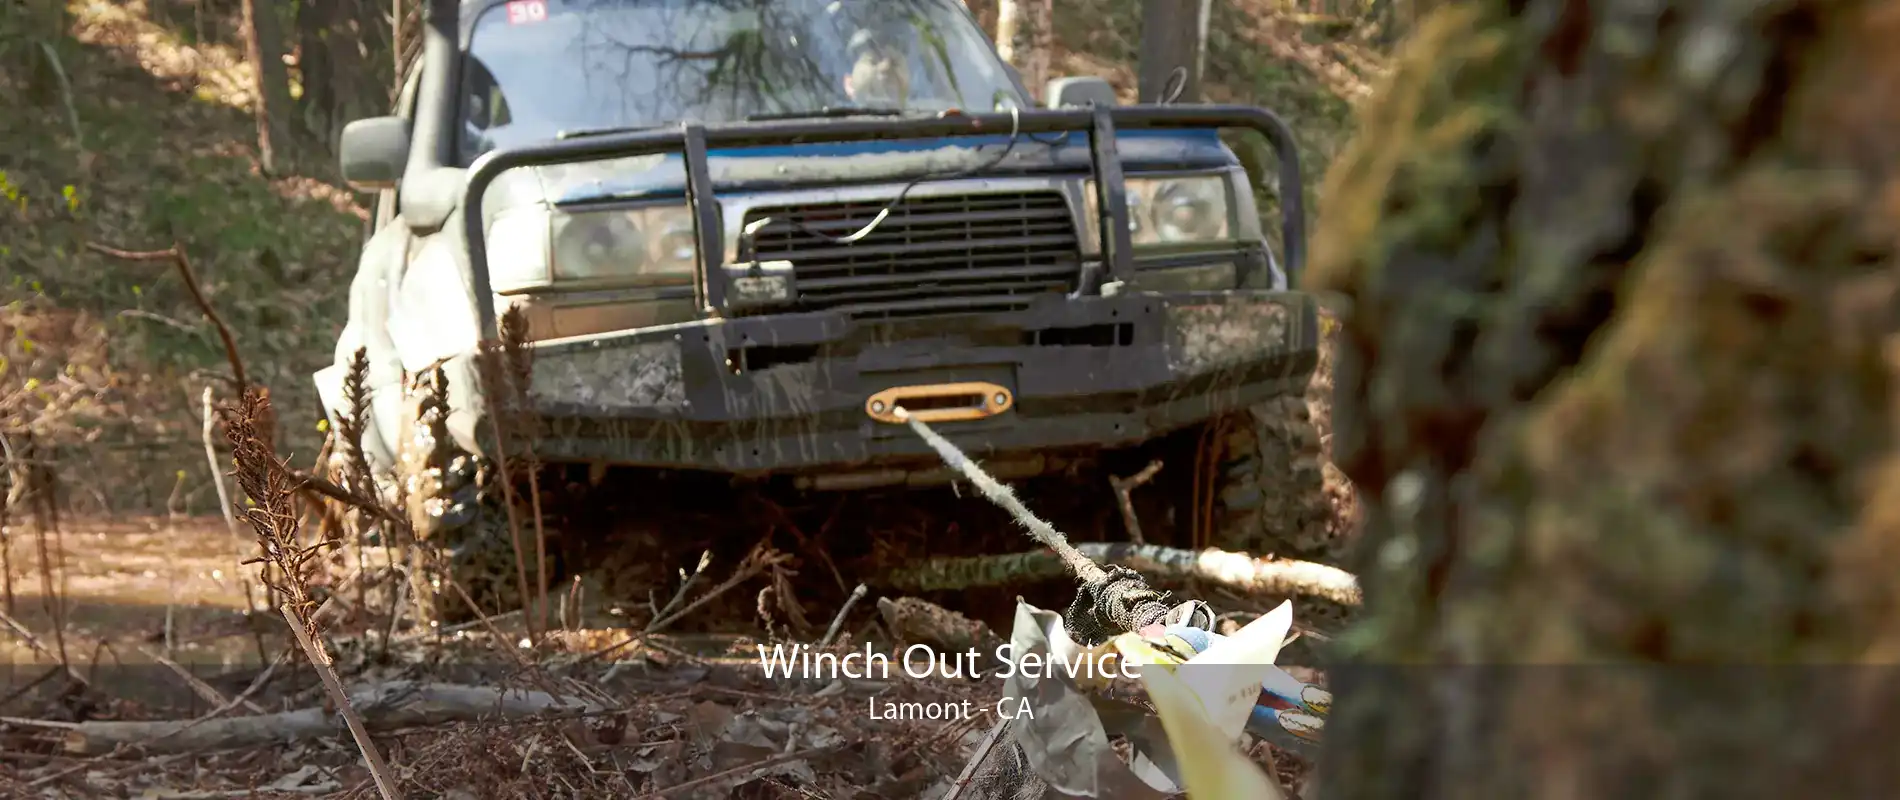 Winch Out Service Lamont - CA